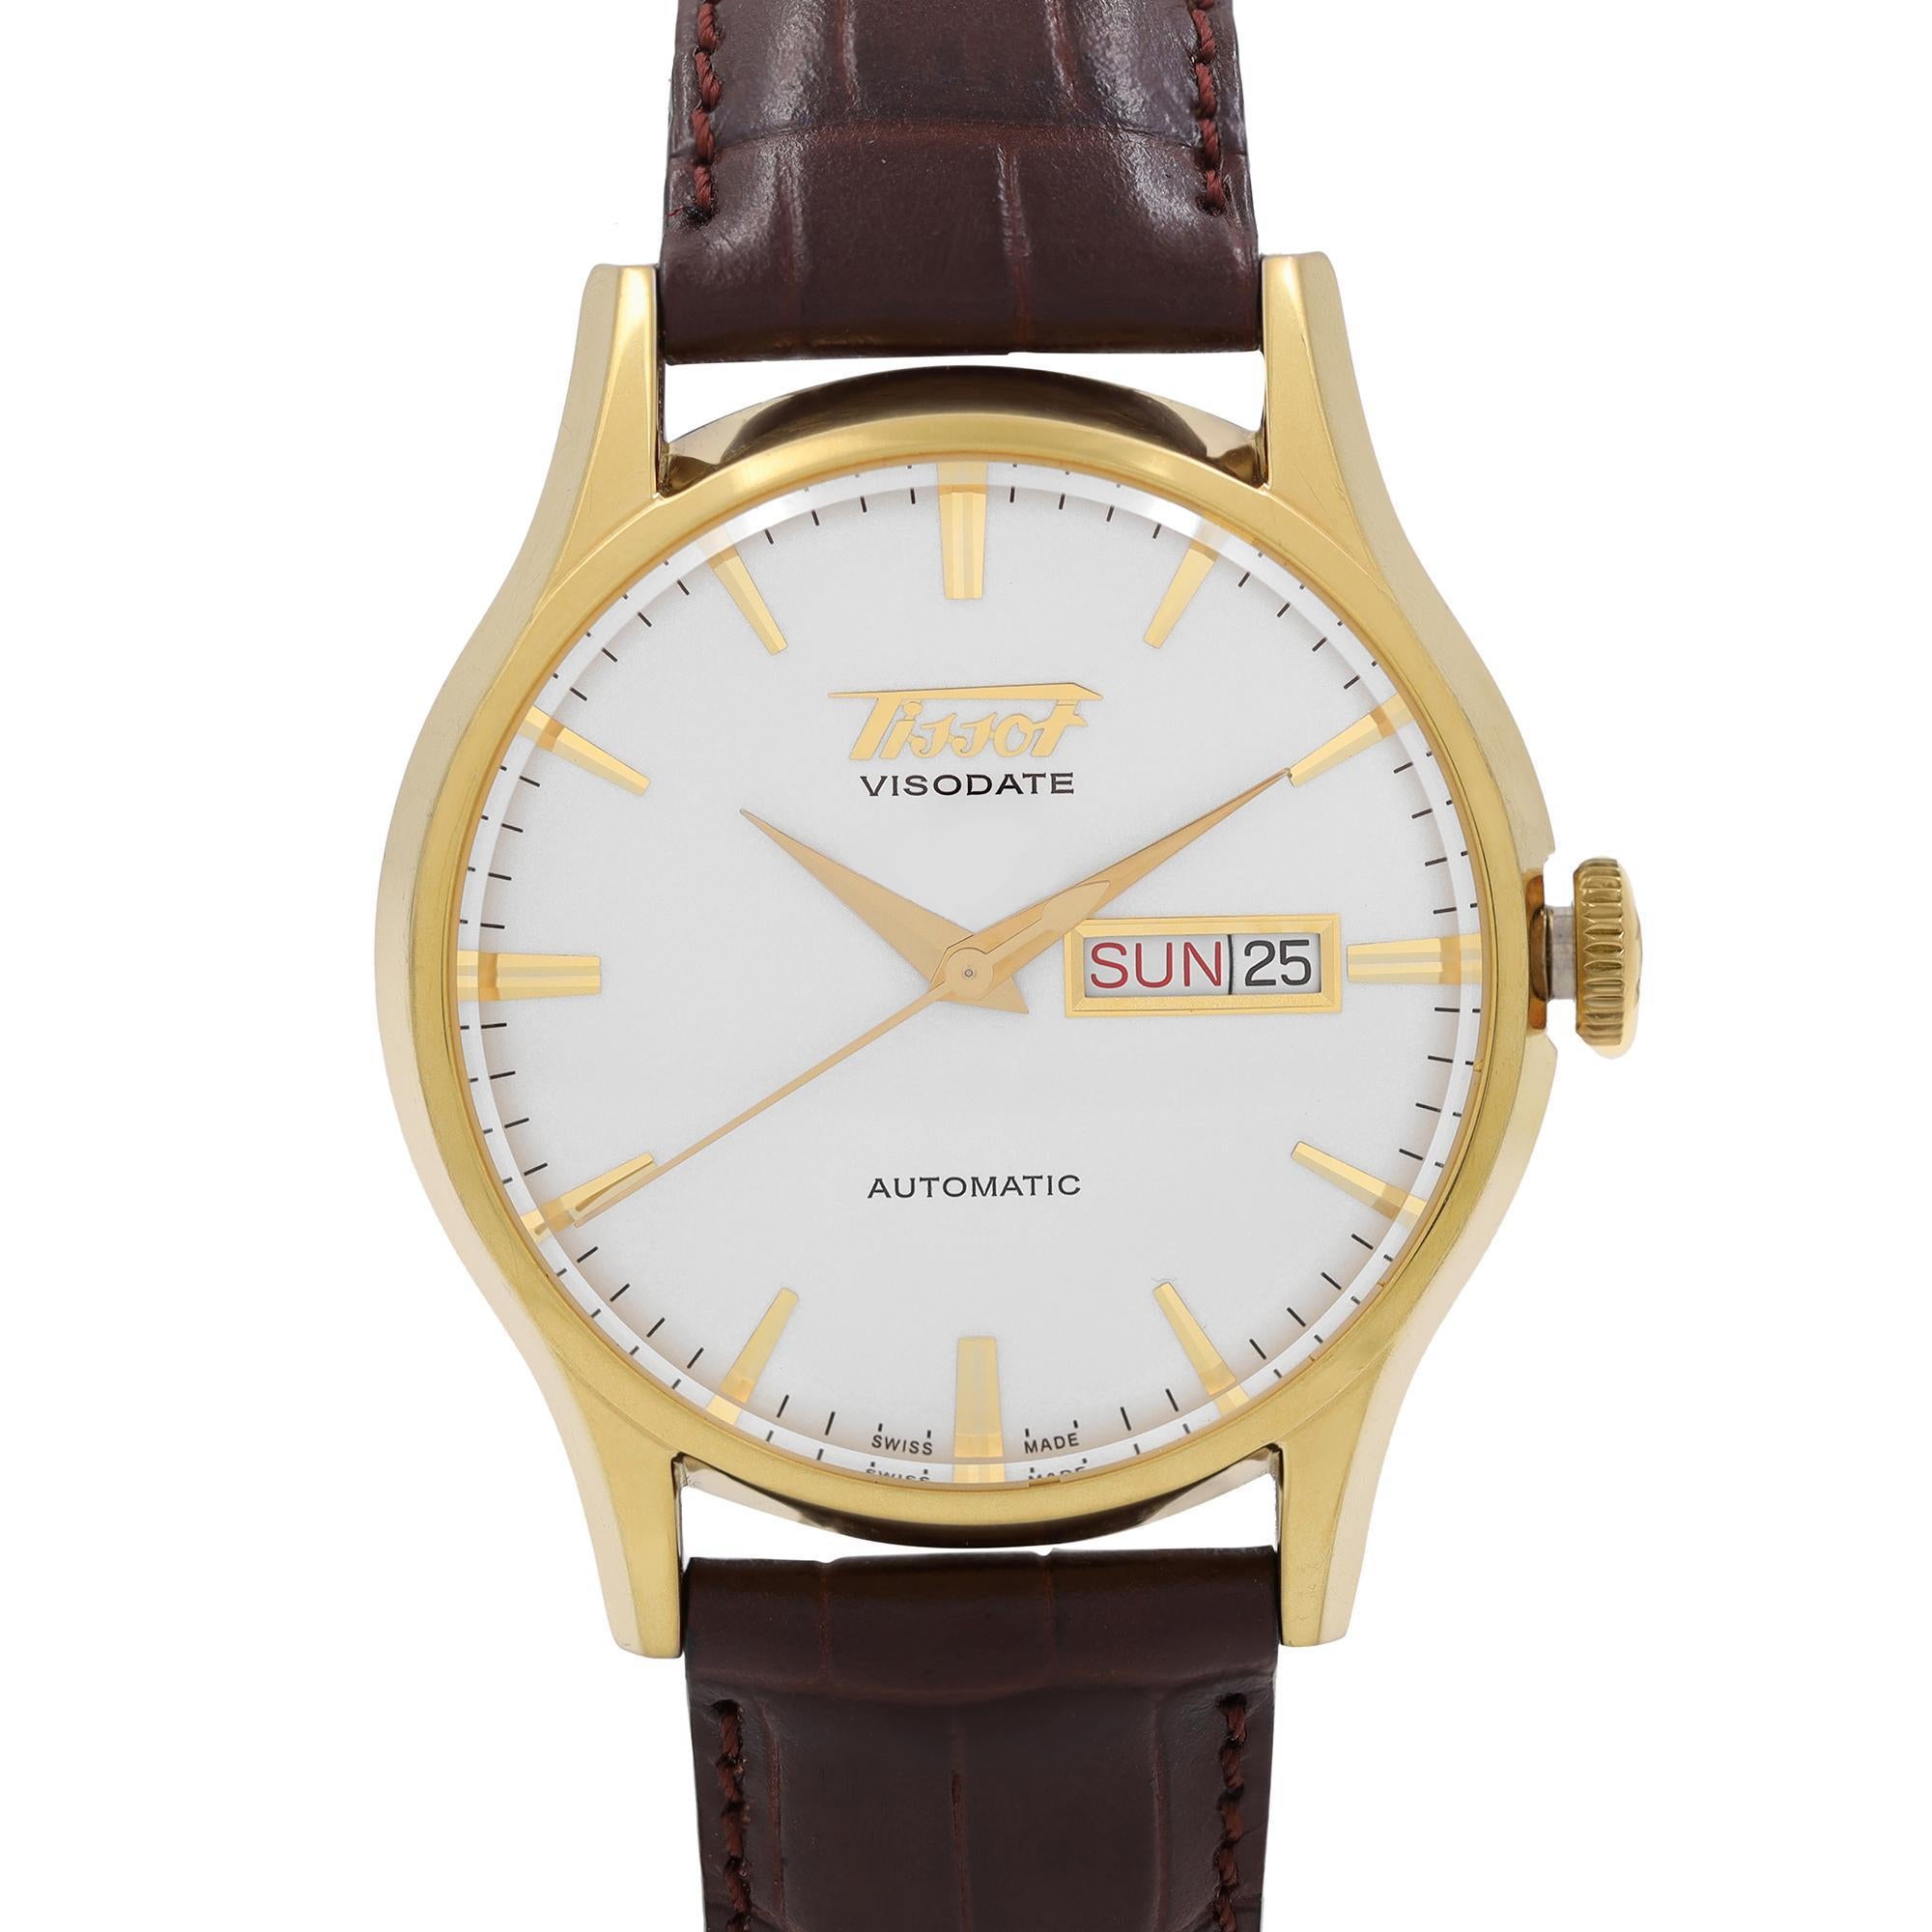 Unworn Tissot Visodate 40mm Men's Watch T019.430.36.031.01. This Beautiful Timepiece is Powered by Mechanical (Automatic) Movement and Features: Round Stainless Steel Gold PVD Coated Case with a Brown Leather Strap, Silver Dial with Gold-Tone Hands